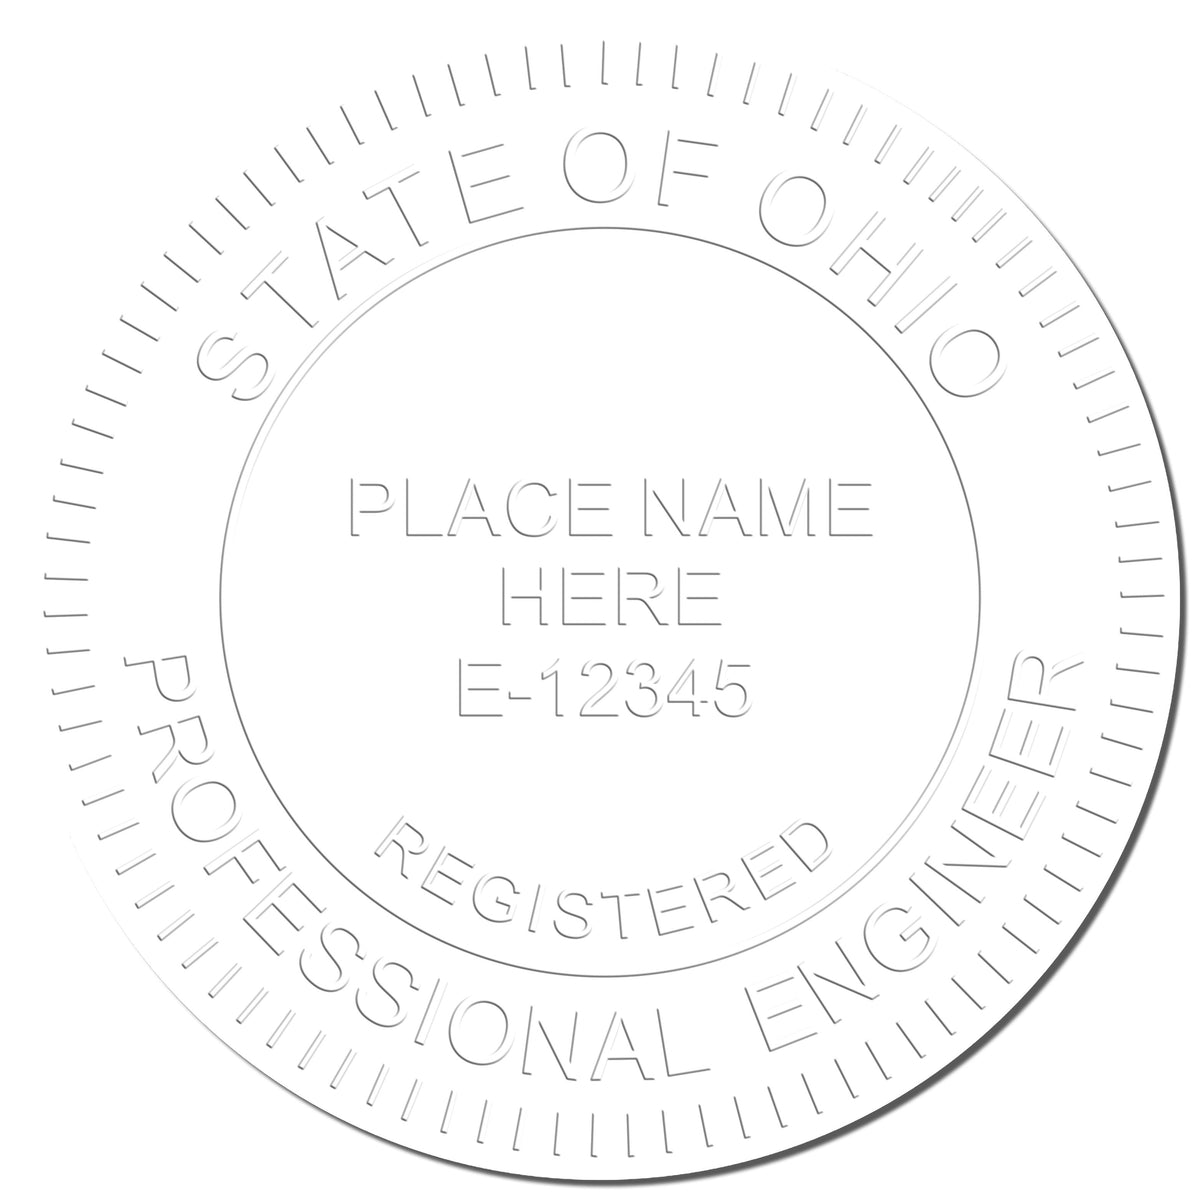 This paper is stamped with a sample imprint of the Hybrid Ohio Engineer Seal, signifying its quality and reliability.